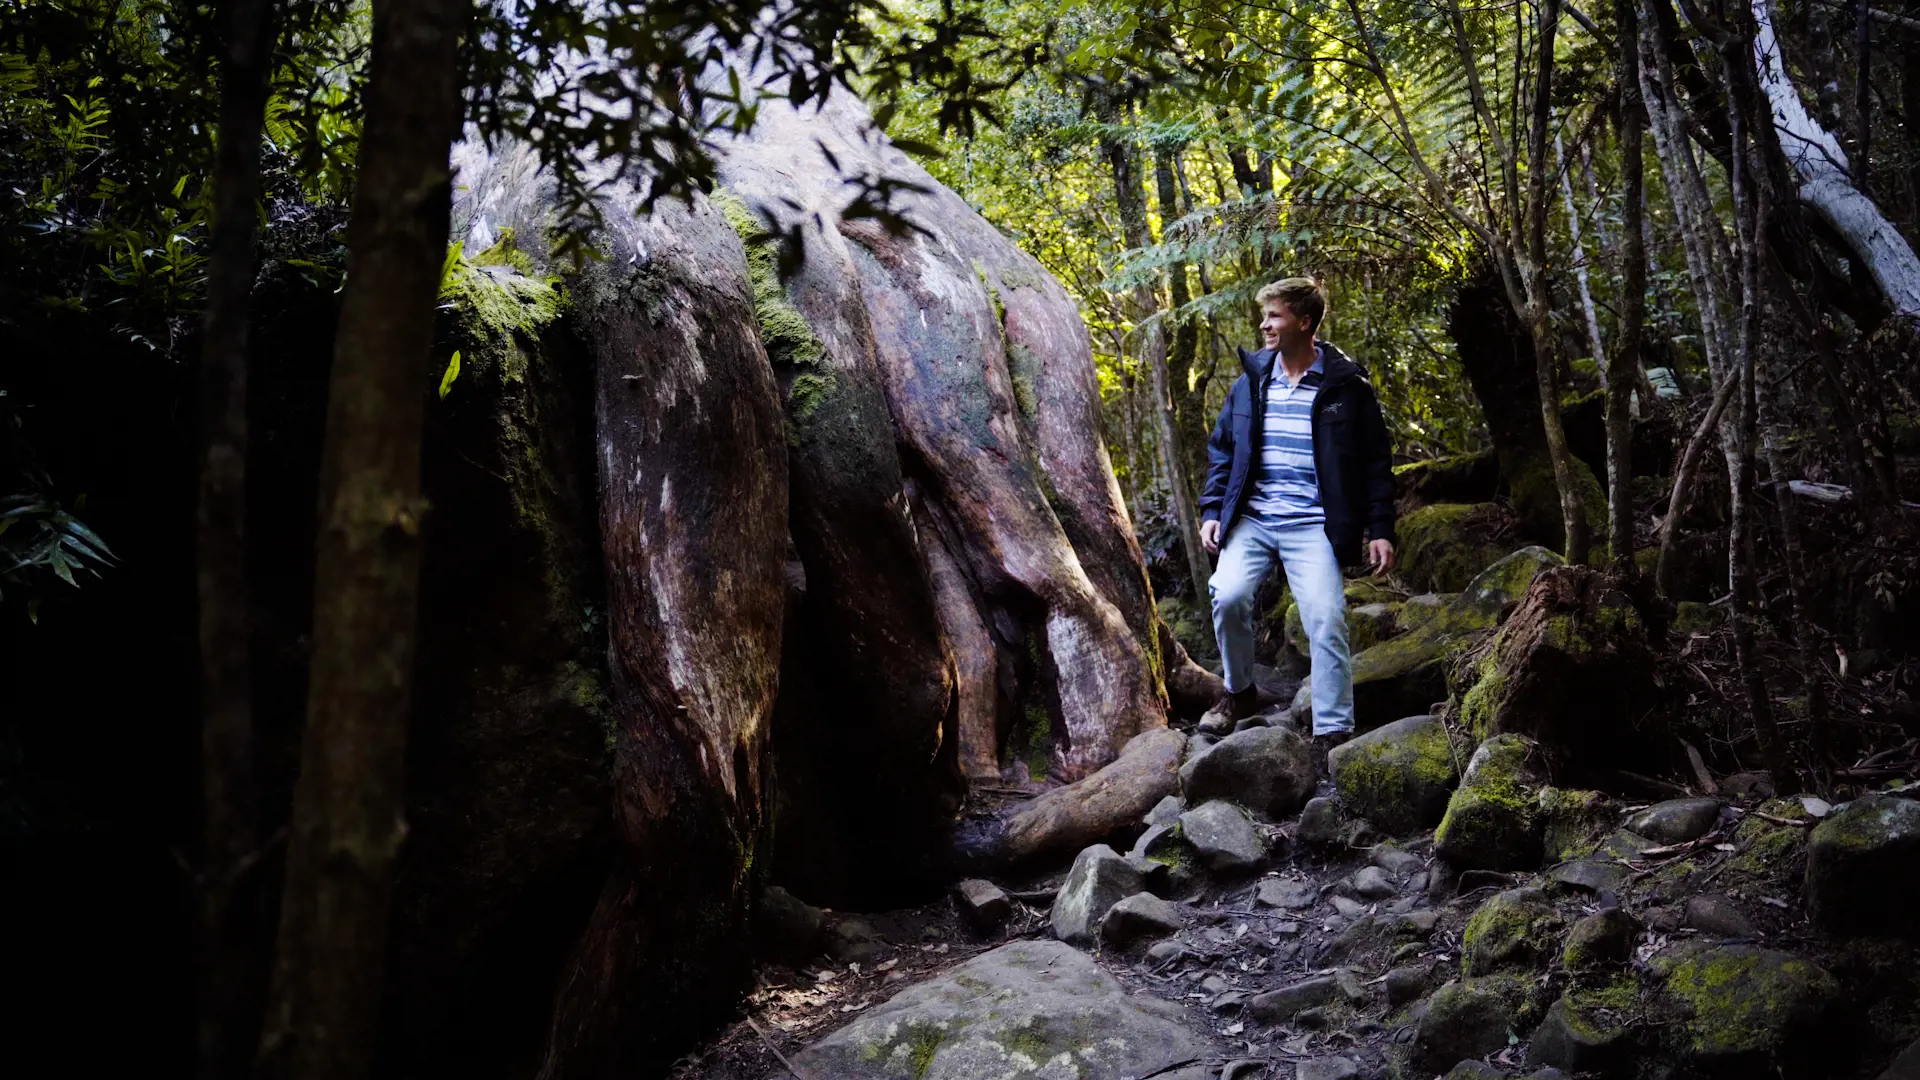 Robert Irwin amongst a forested scene looking at Octopus Tree on kunanyi / Mount Wellington